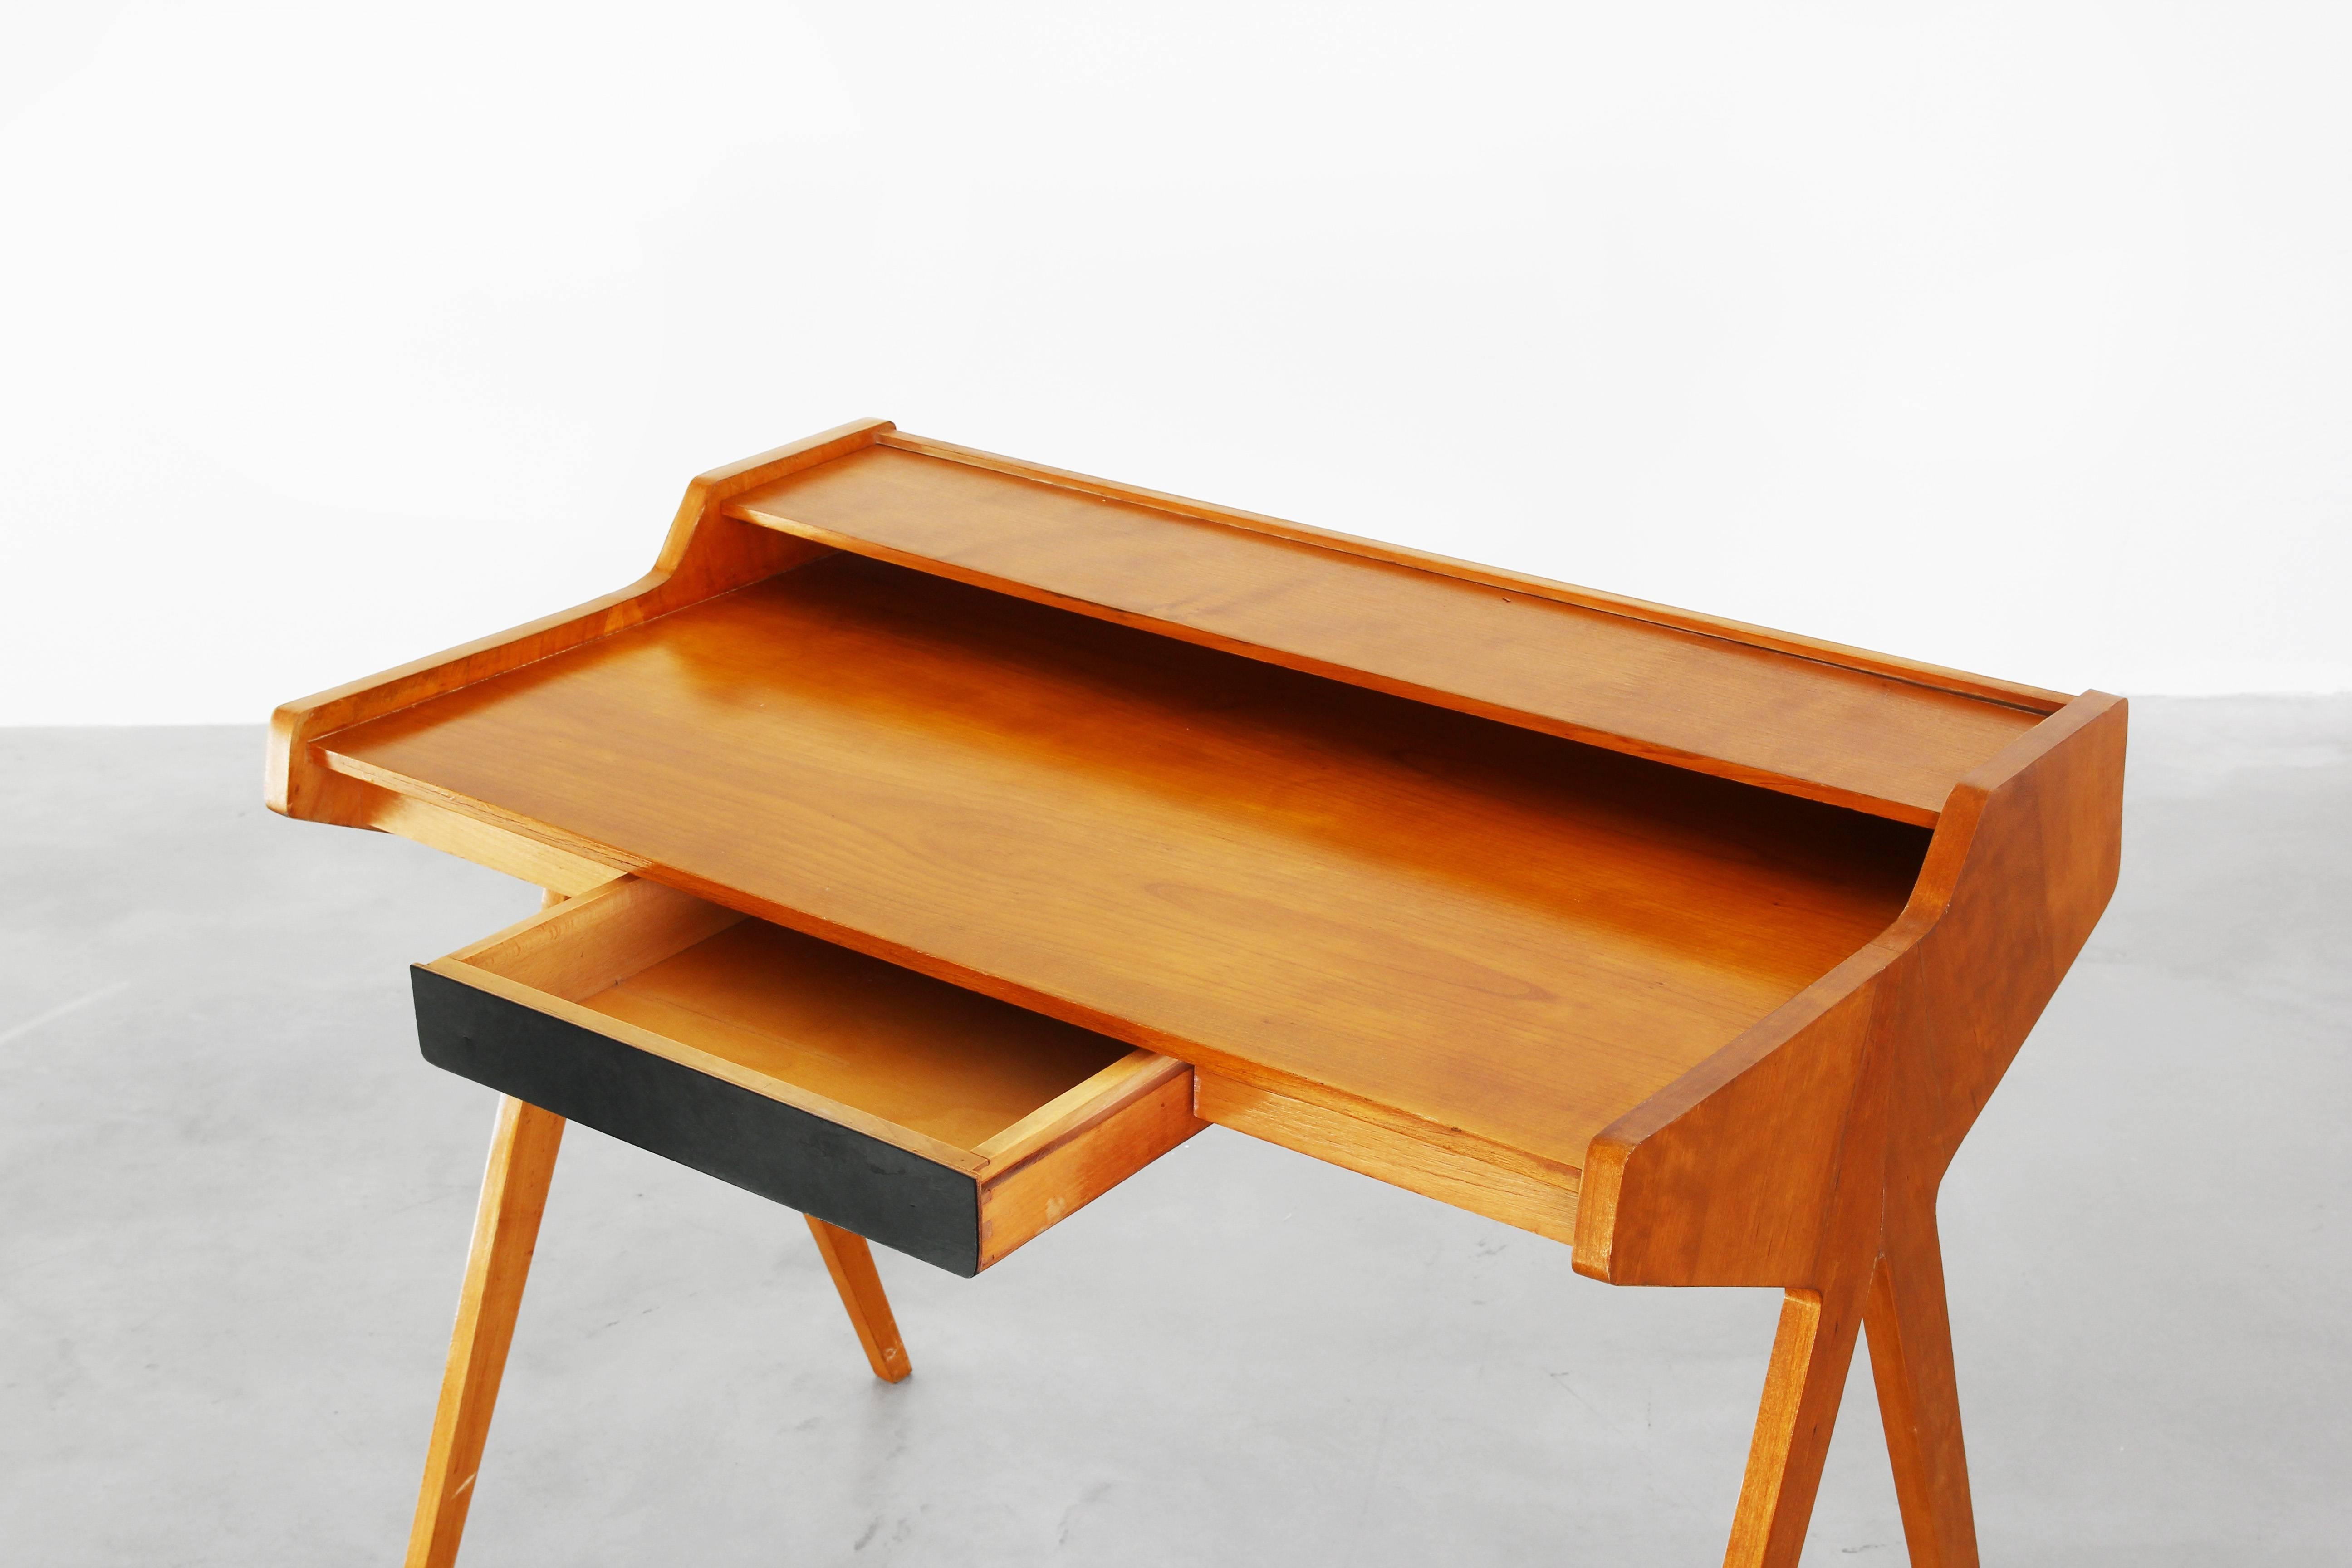 Nutwood Beautiful Desk Writing Table by Helmut Magg for WK Möbel Germany, 1955